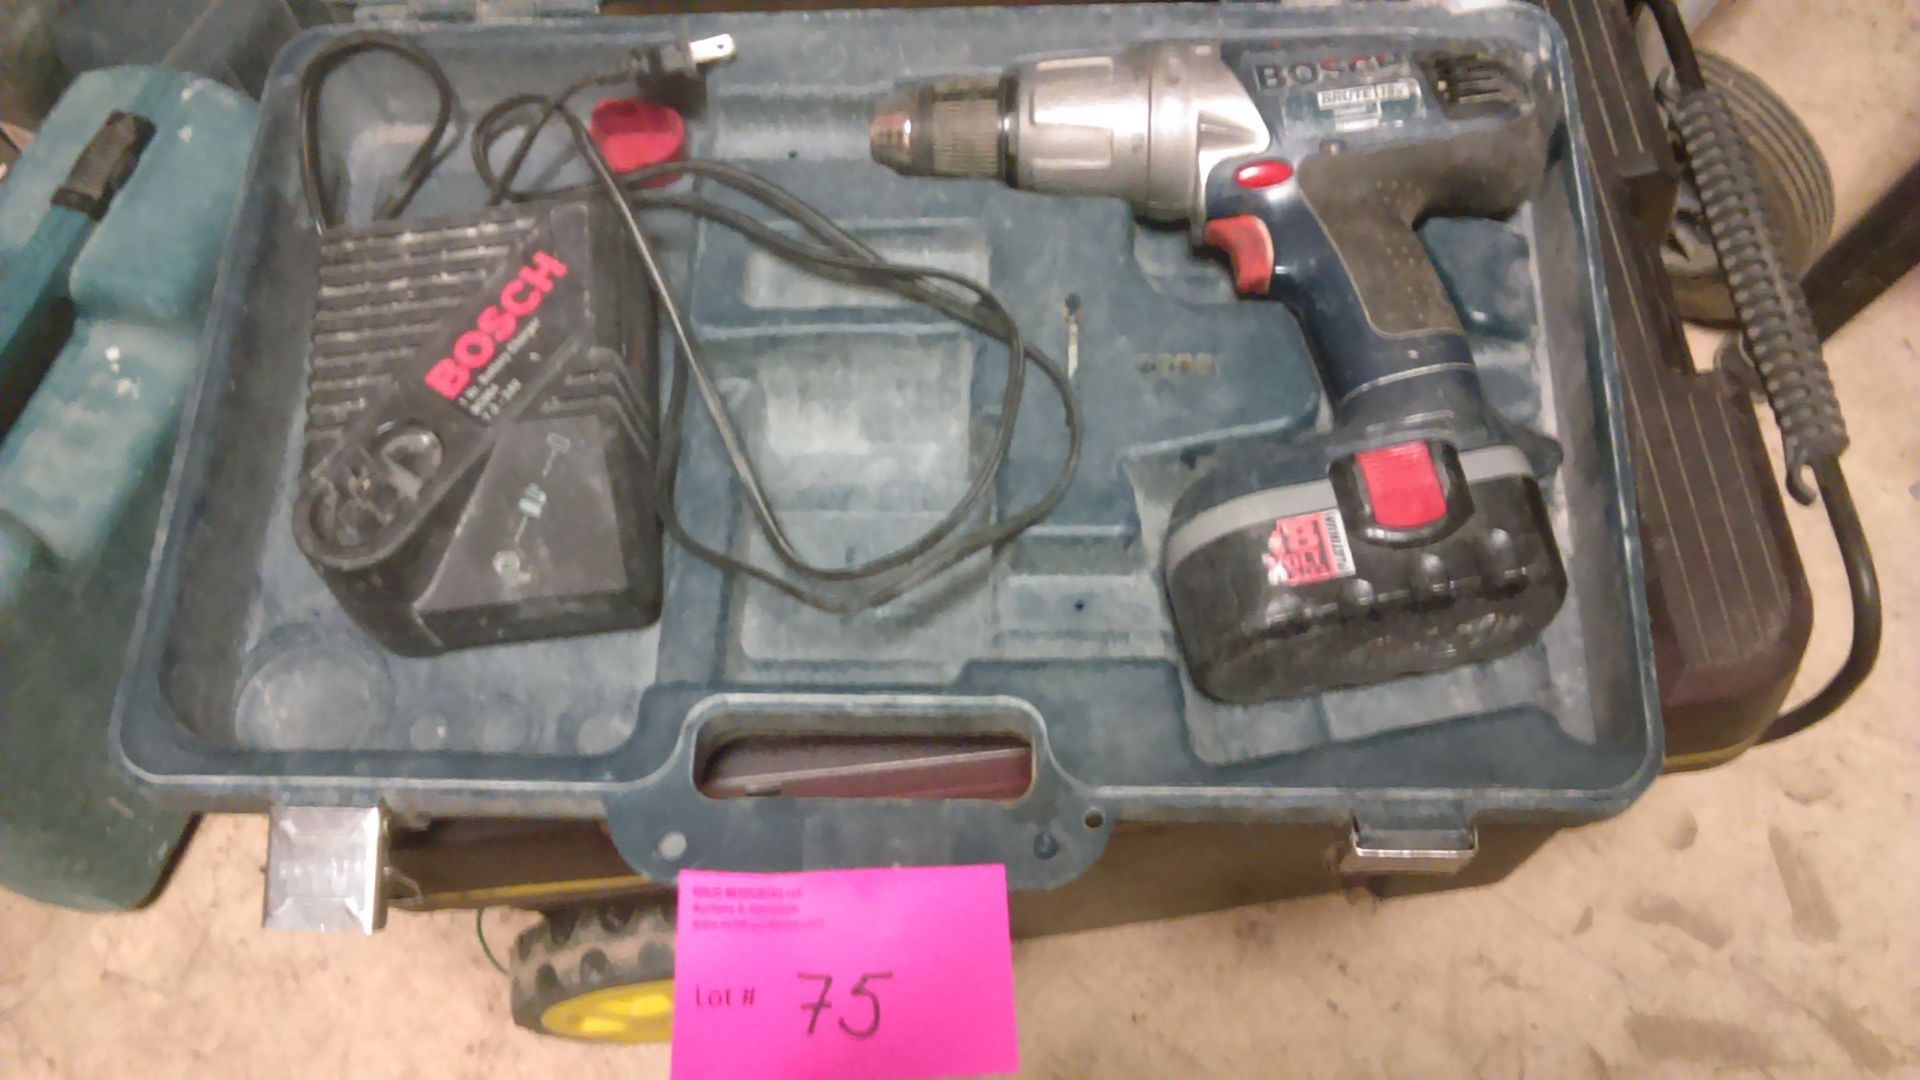 BOSCH 18V CORDLESS HAMMER DRILL, BATTERY, CHARGER, IN CASE